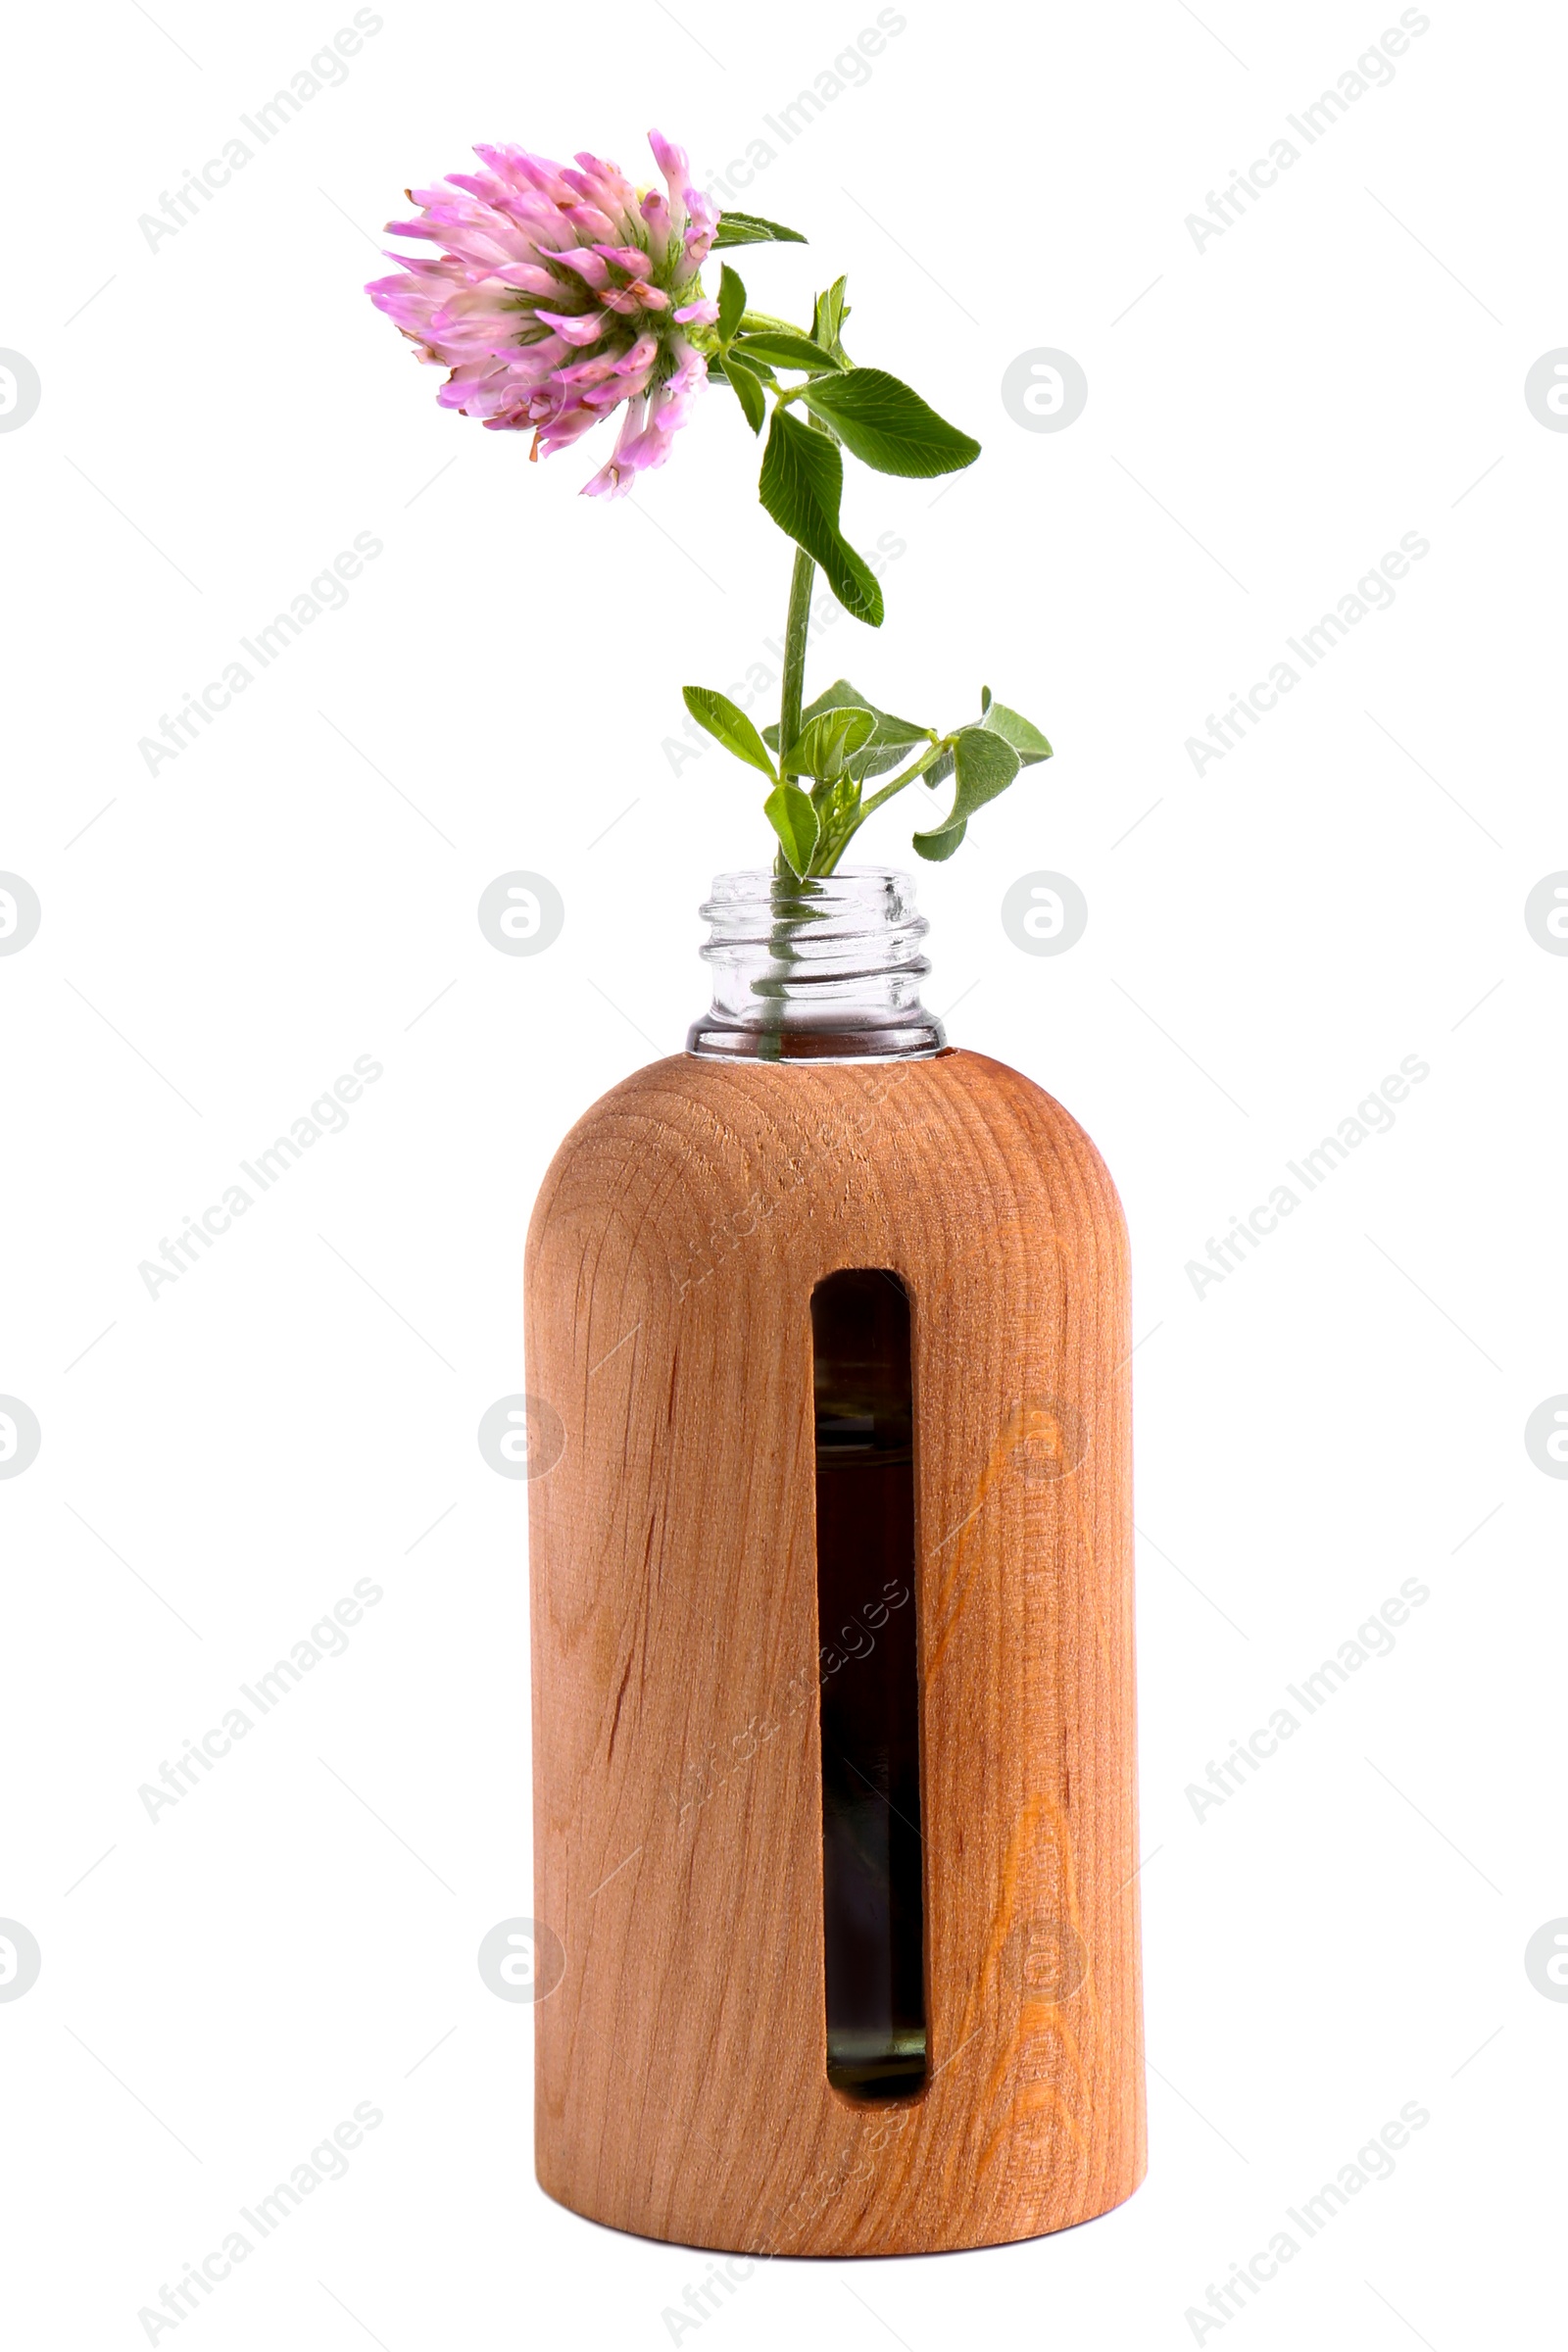 Photo of Bottle of essential oil and clover flower on white background